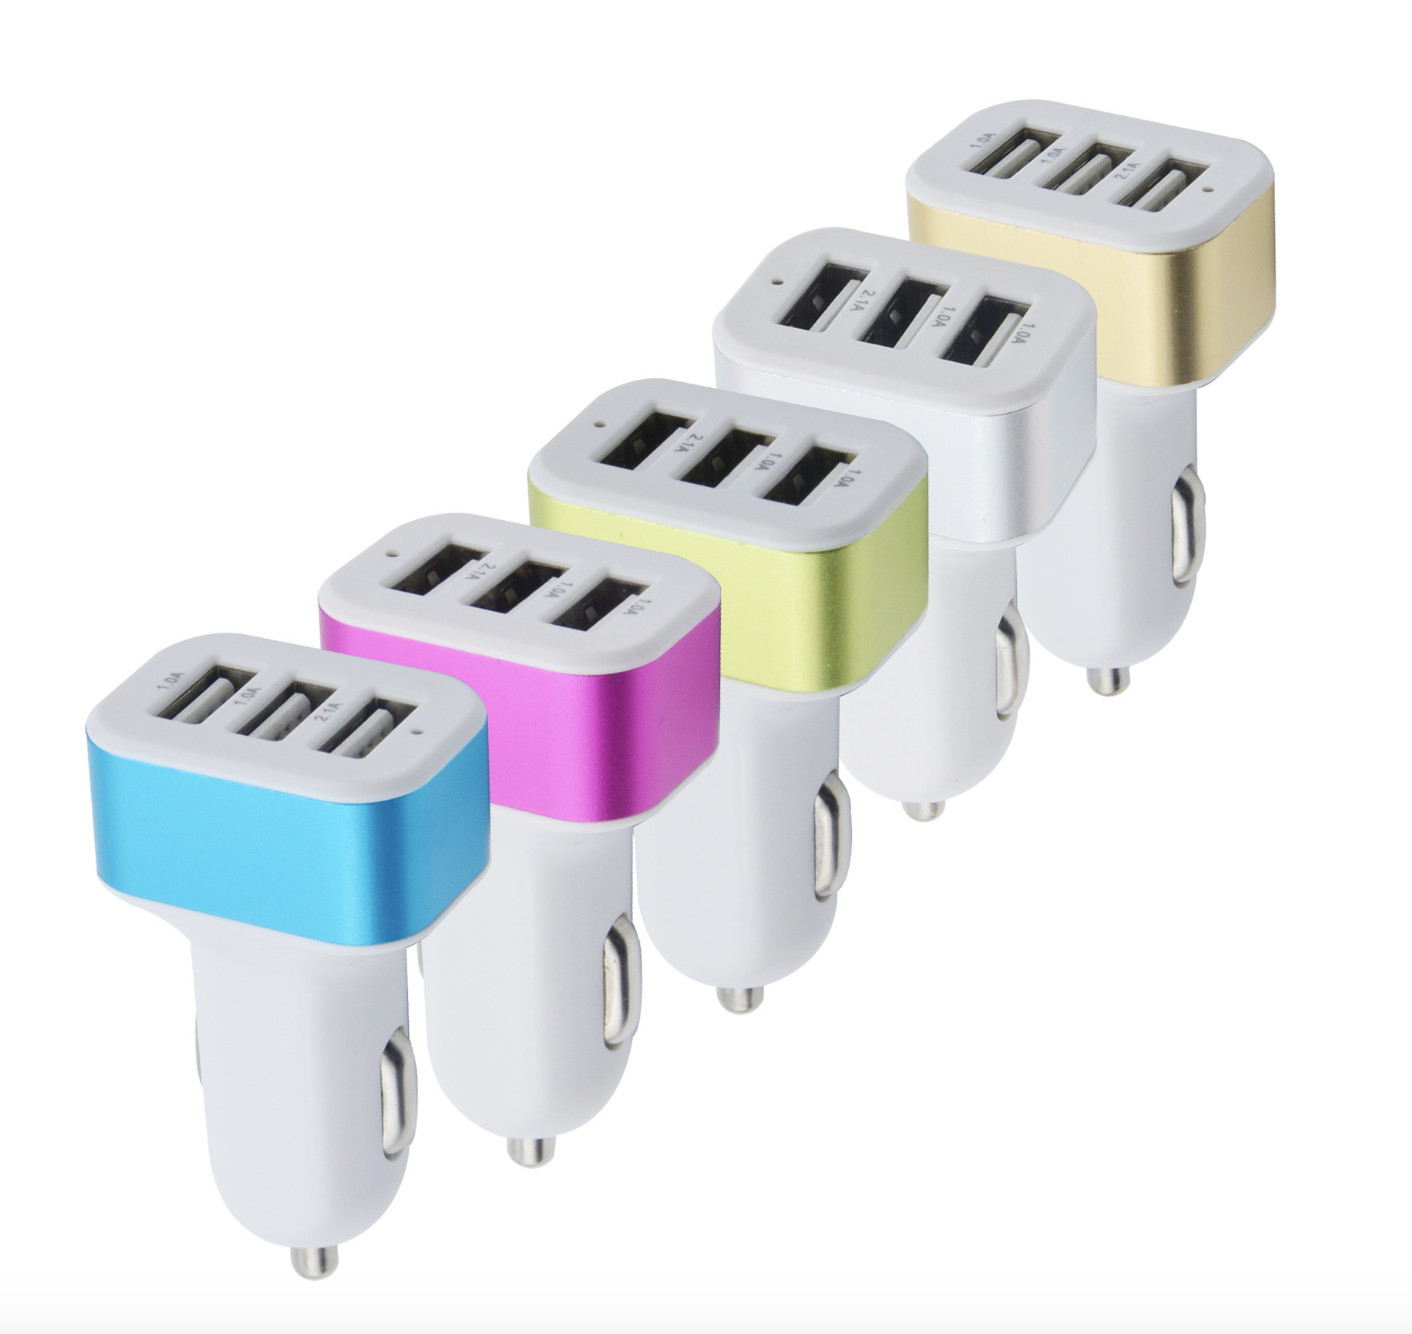 Quality Shenzhen factory supply Aluminium frame 3 USB car charger phone tablet chargers for sale